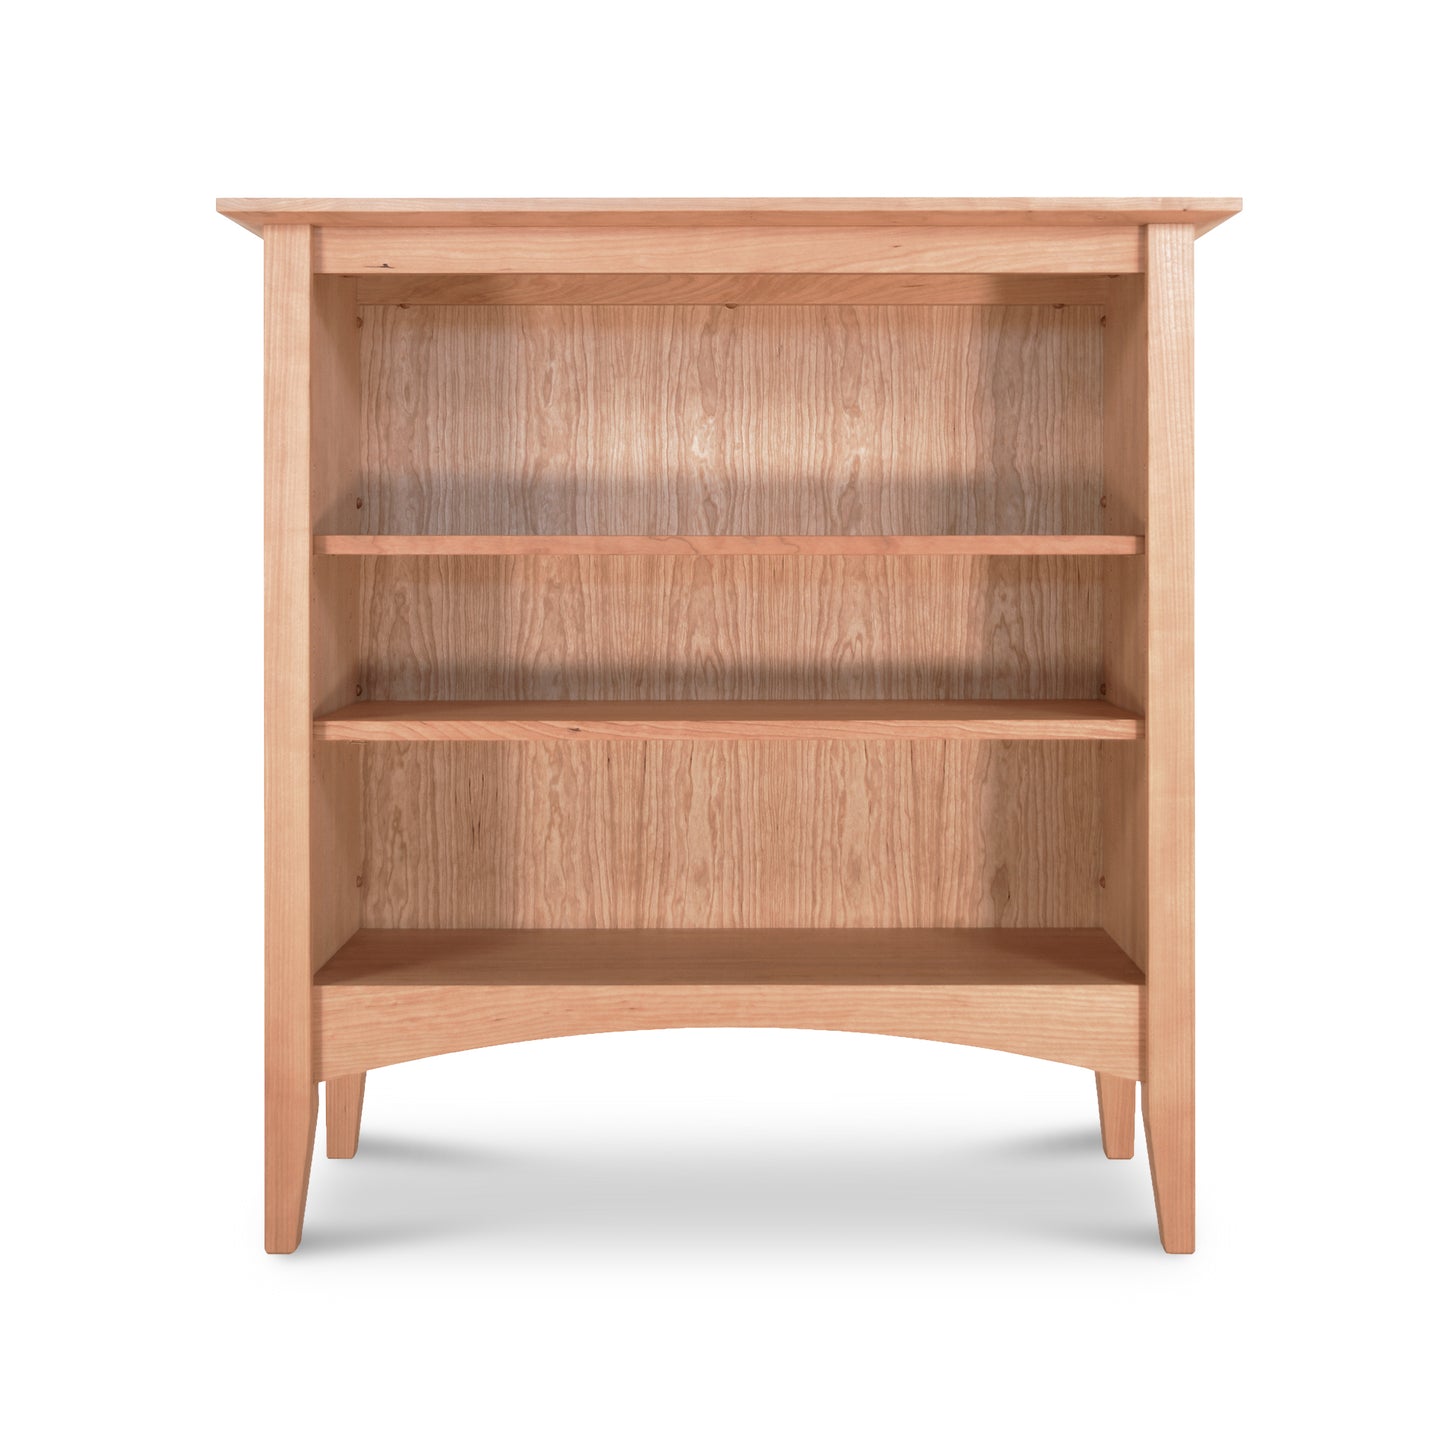 A Maple Corner Woodworks American Shaker bookcase, made from sustainably harvested hardwoods, set on a white background.